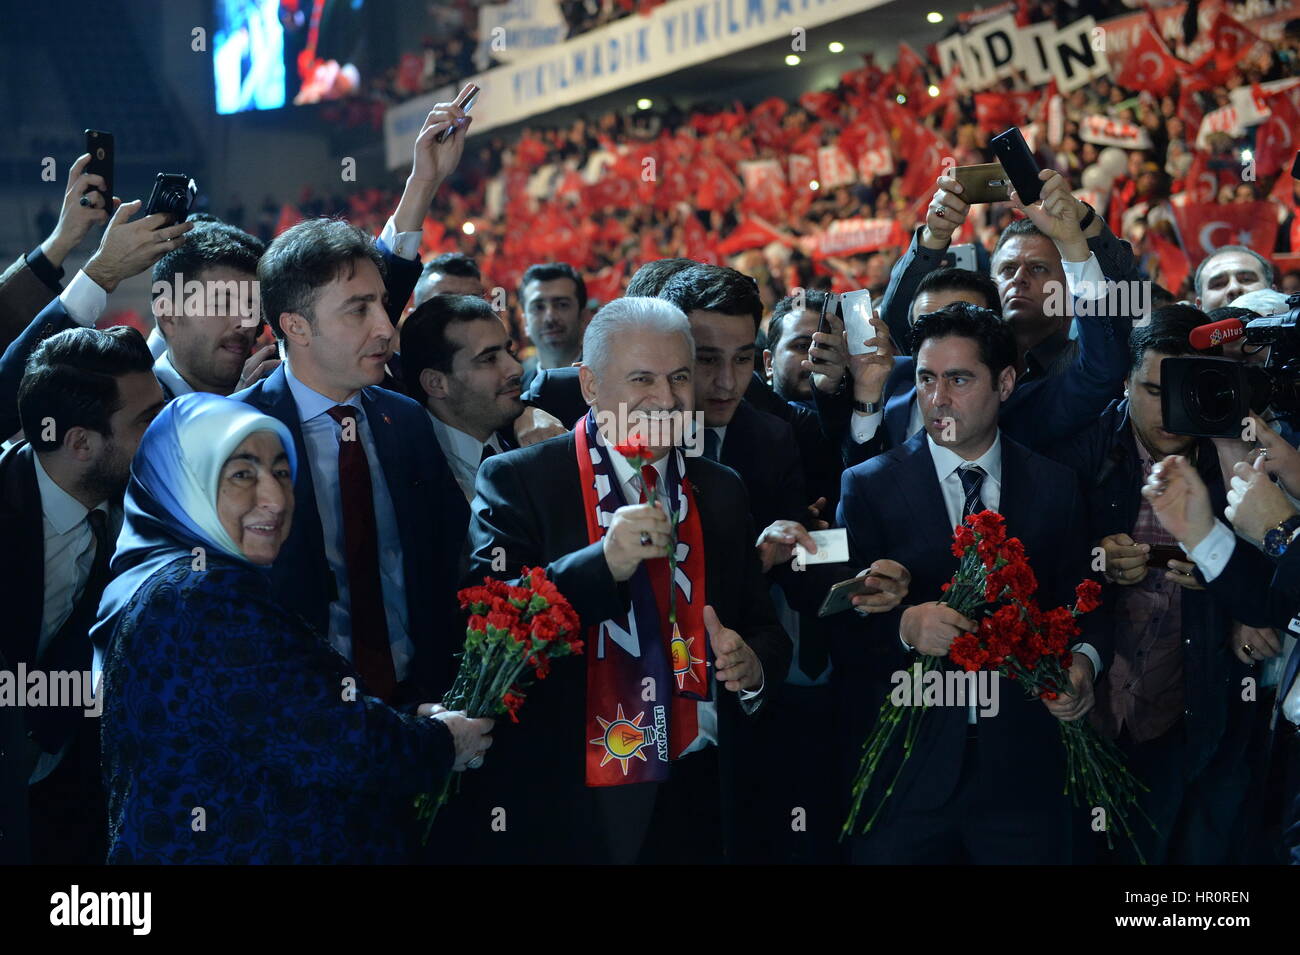 Ankara, Turkey. 25th Feb, 2017. Turkish Prime Minister Binali Yildirim (C) attends Turkish ruling Justice and Development Party (AKP)'s 'Yes' campaign for the April 16 constitutional referendum in Ankara, capital of Turkey, on Feb. 25, 2017. Turkish ruling Justice and Development Party (AKP) kicked off its 'Yes' campaign for the April 16 constitutional referendum on Saturday, local media reported. Credit: Mustafa Kaya/Xinhua/Alamy Live News Stock Photo